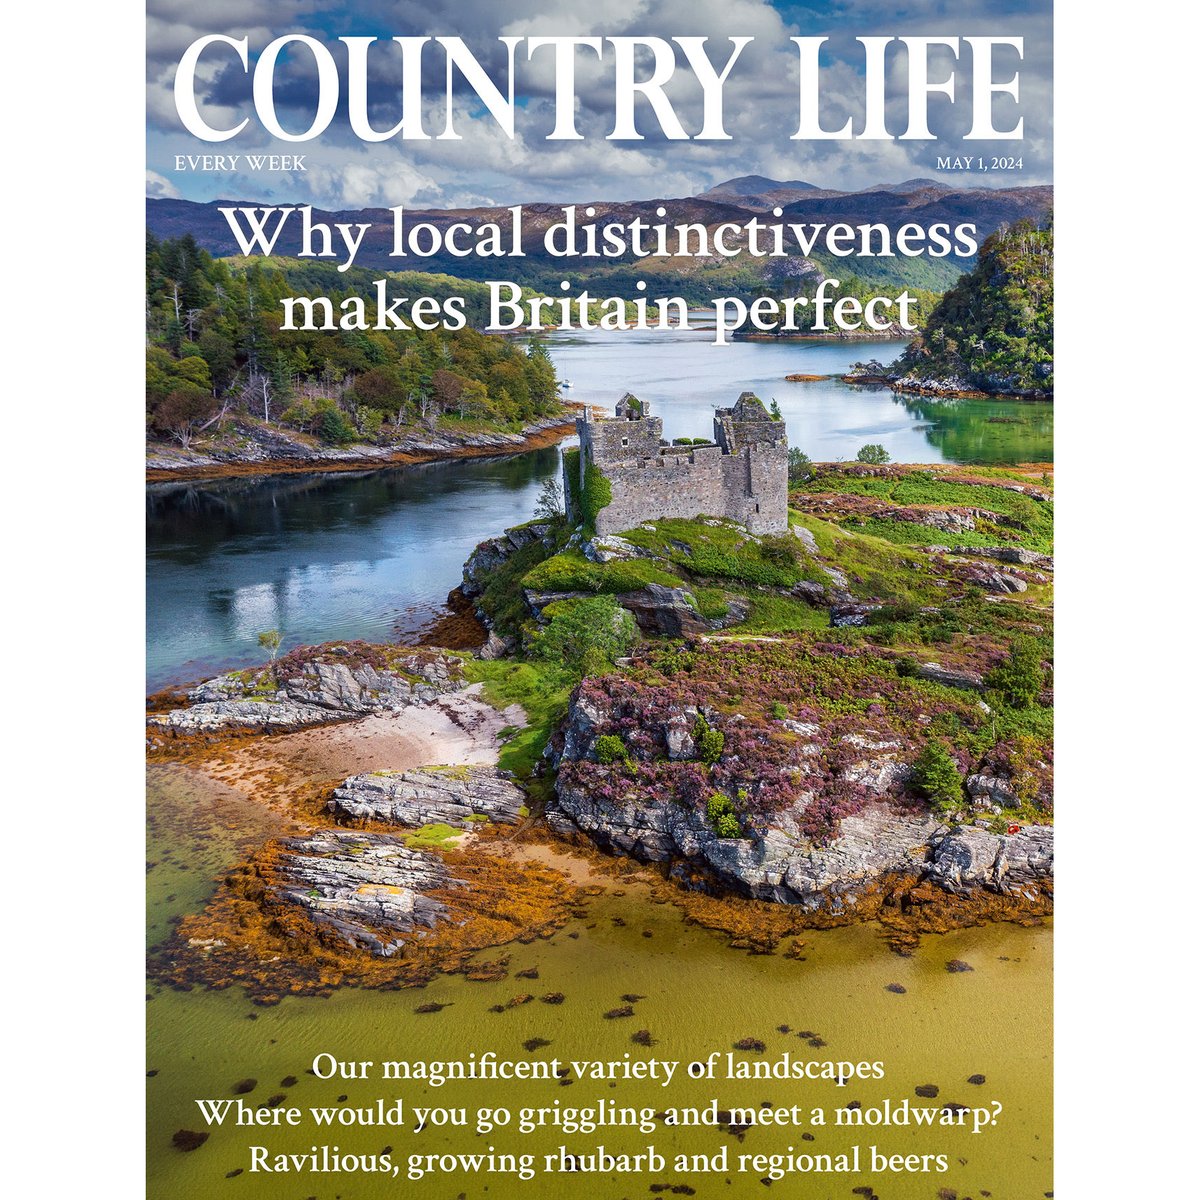 Castle Tioram, on the island of Eilean Tioram in Loch Moidart, features on this week's cover of Country Life, which looks at the extraordinary diversity and distinctiveness to be found across Britain.
📷  by @sebwasek / 4Corners Images
#countrylifemagazine #castletioram